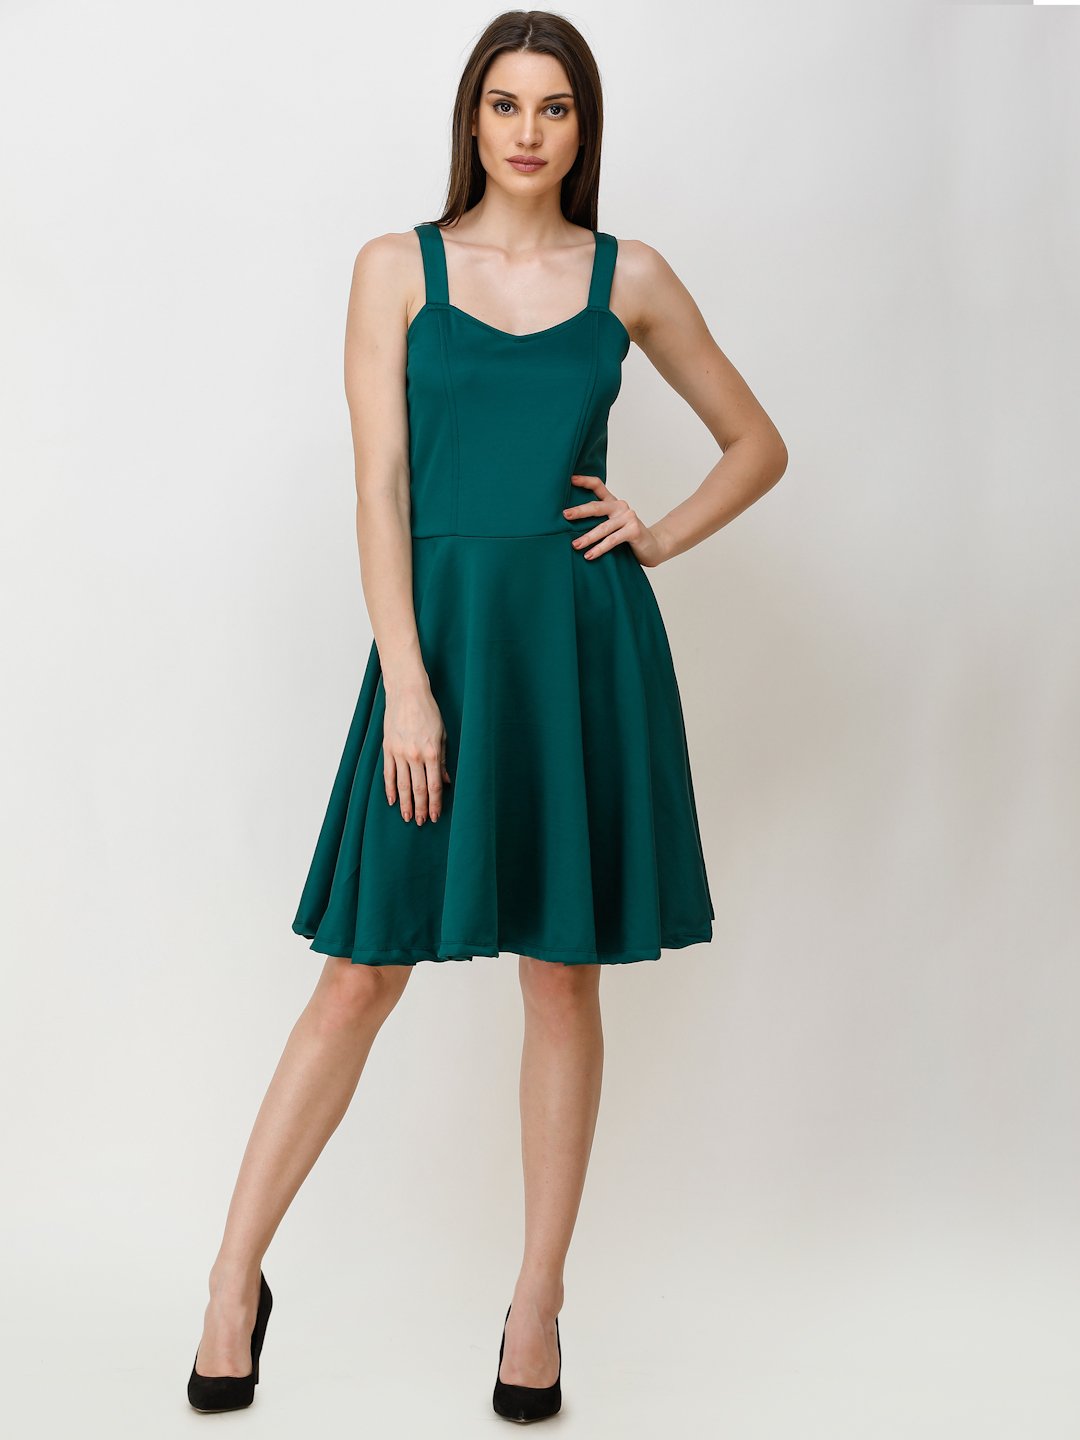 SCORPIUS GREEN STYLED BACK COCKTAIL DRESS